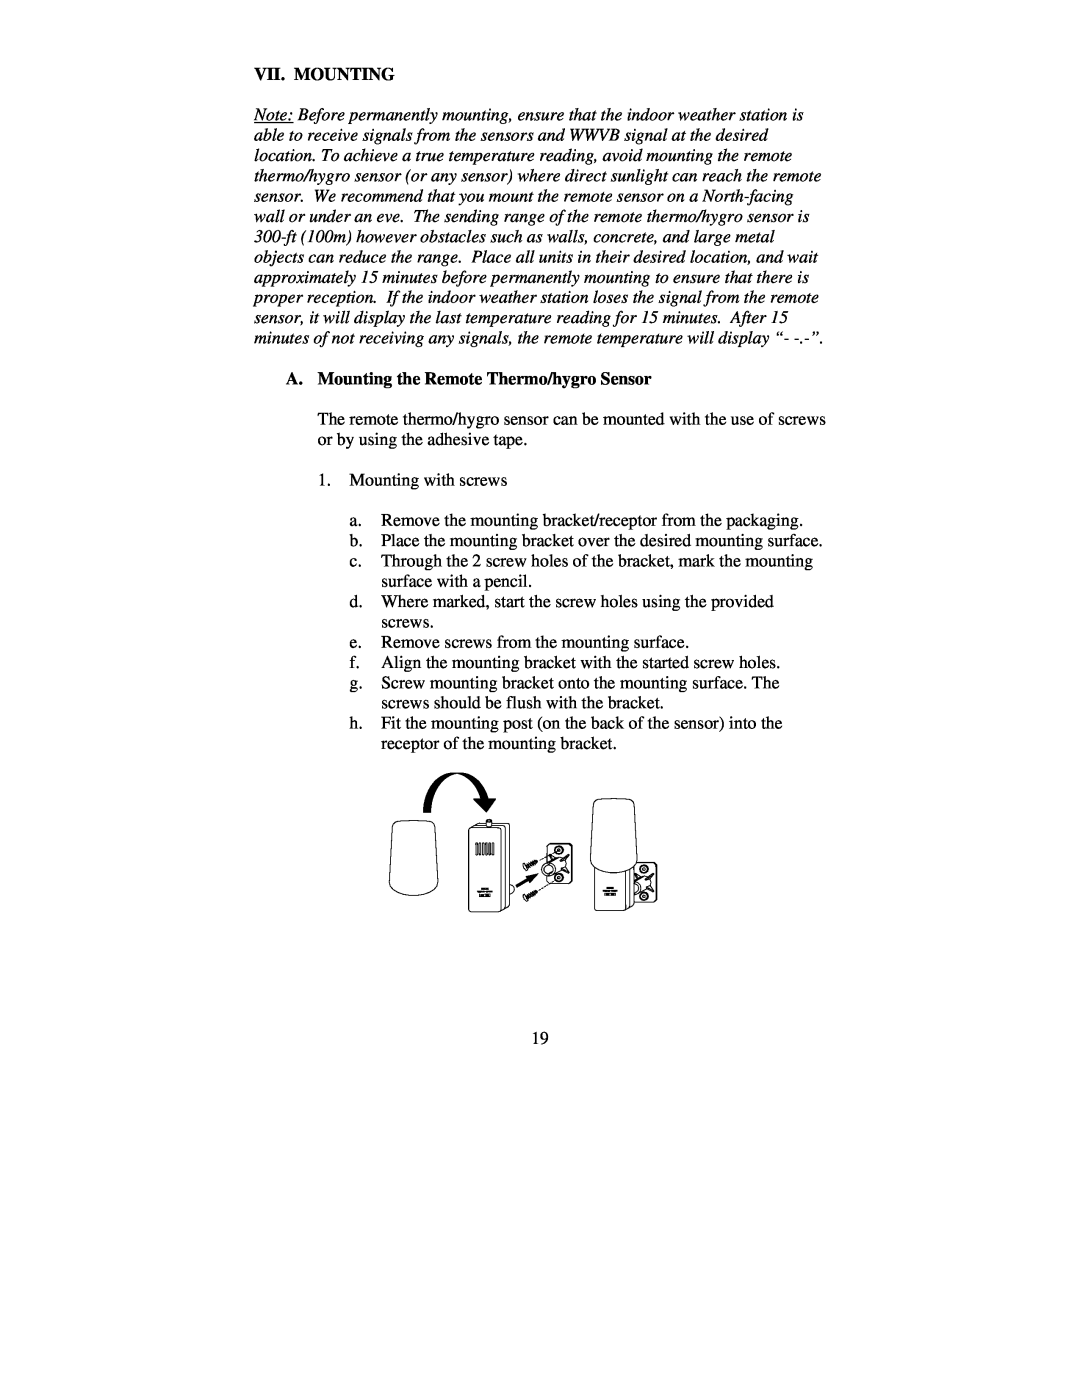 La Crosse Technology WS-8035 instruction manual Vii. Mounting, A. Mounting the Remote Thermo/hygro Sensor 